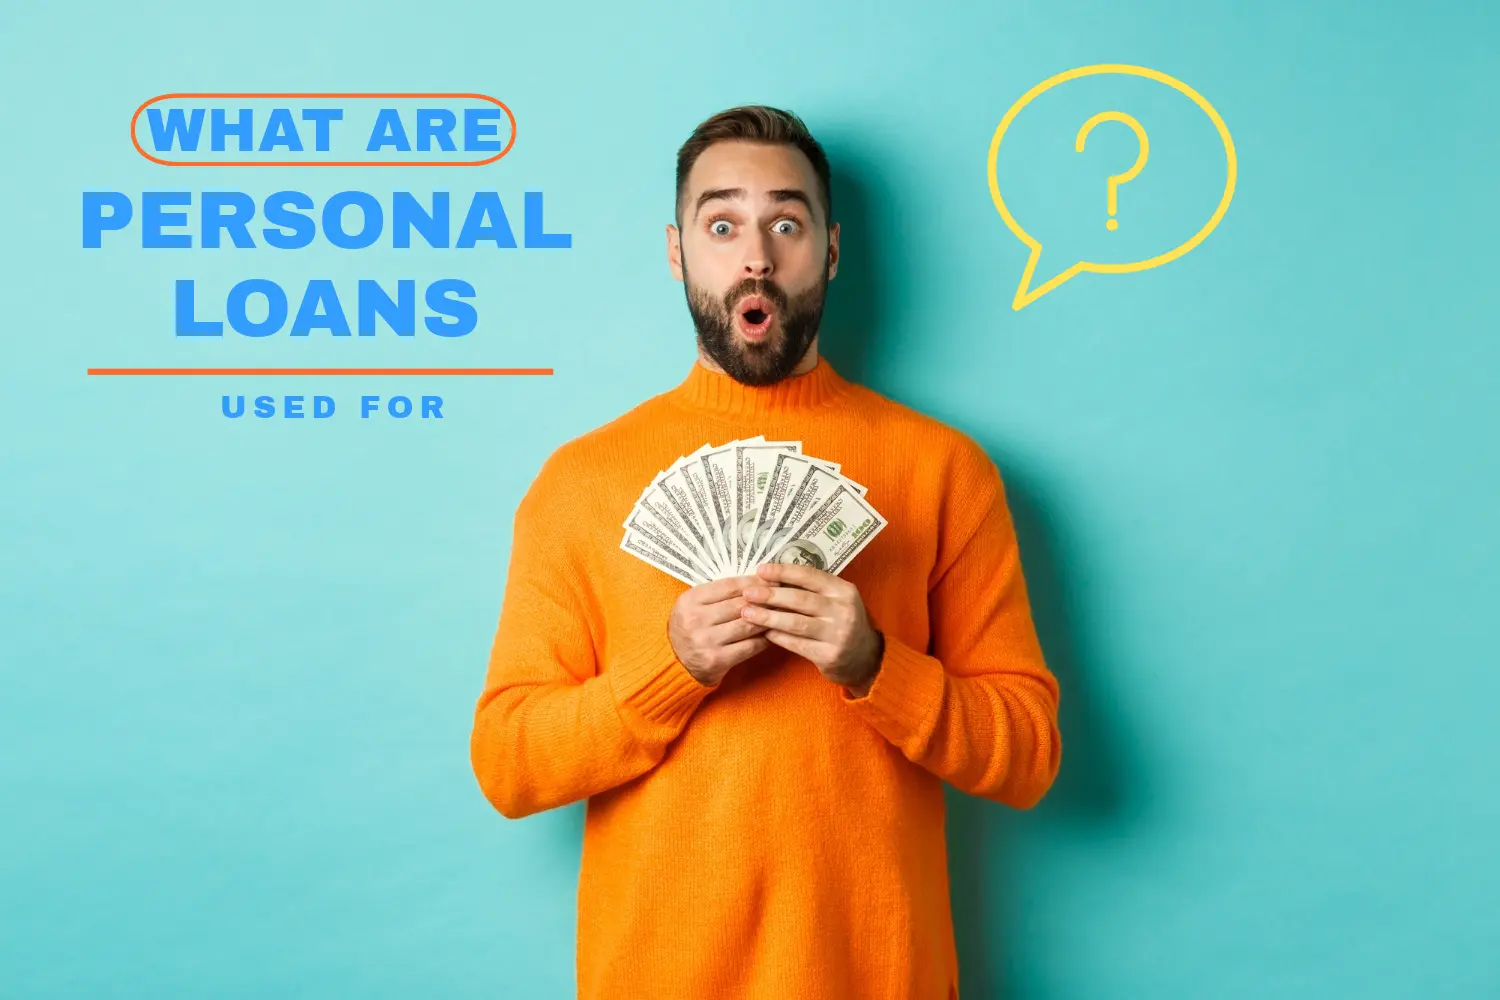 What Are Personal Loans Used For? Savior $1200 Loan Options